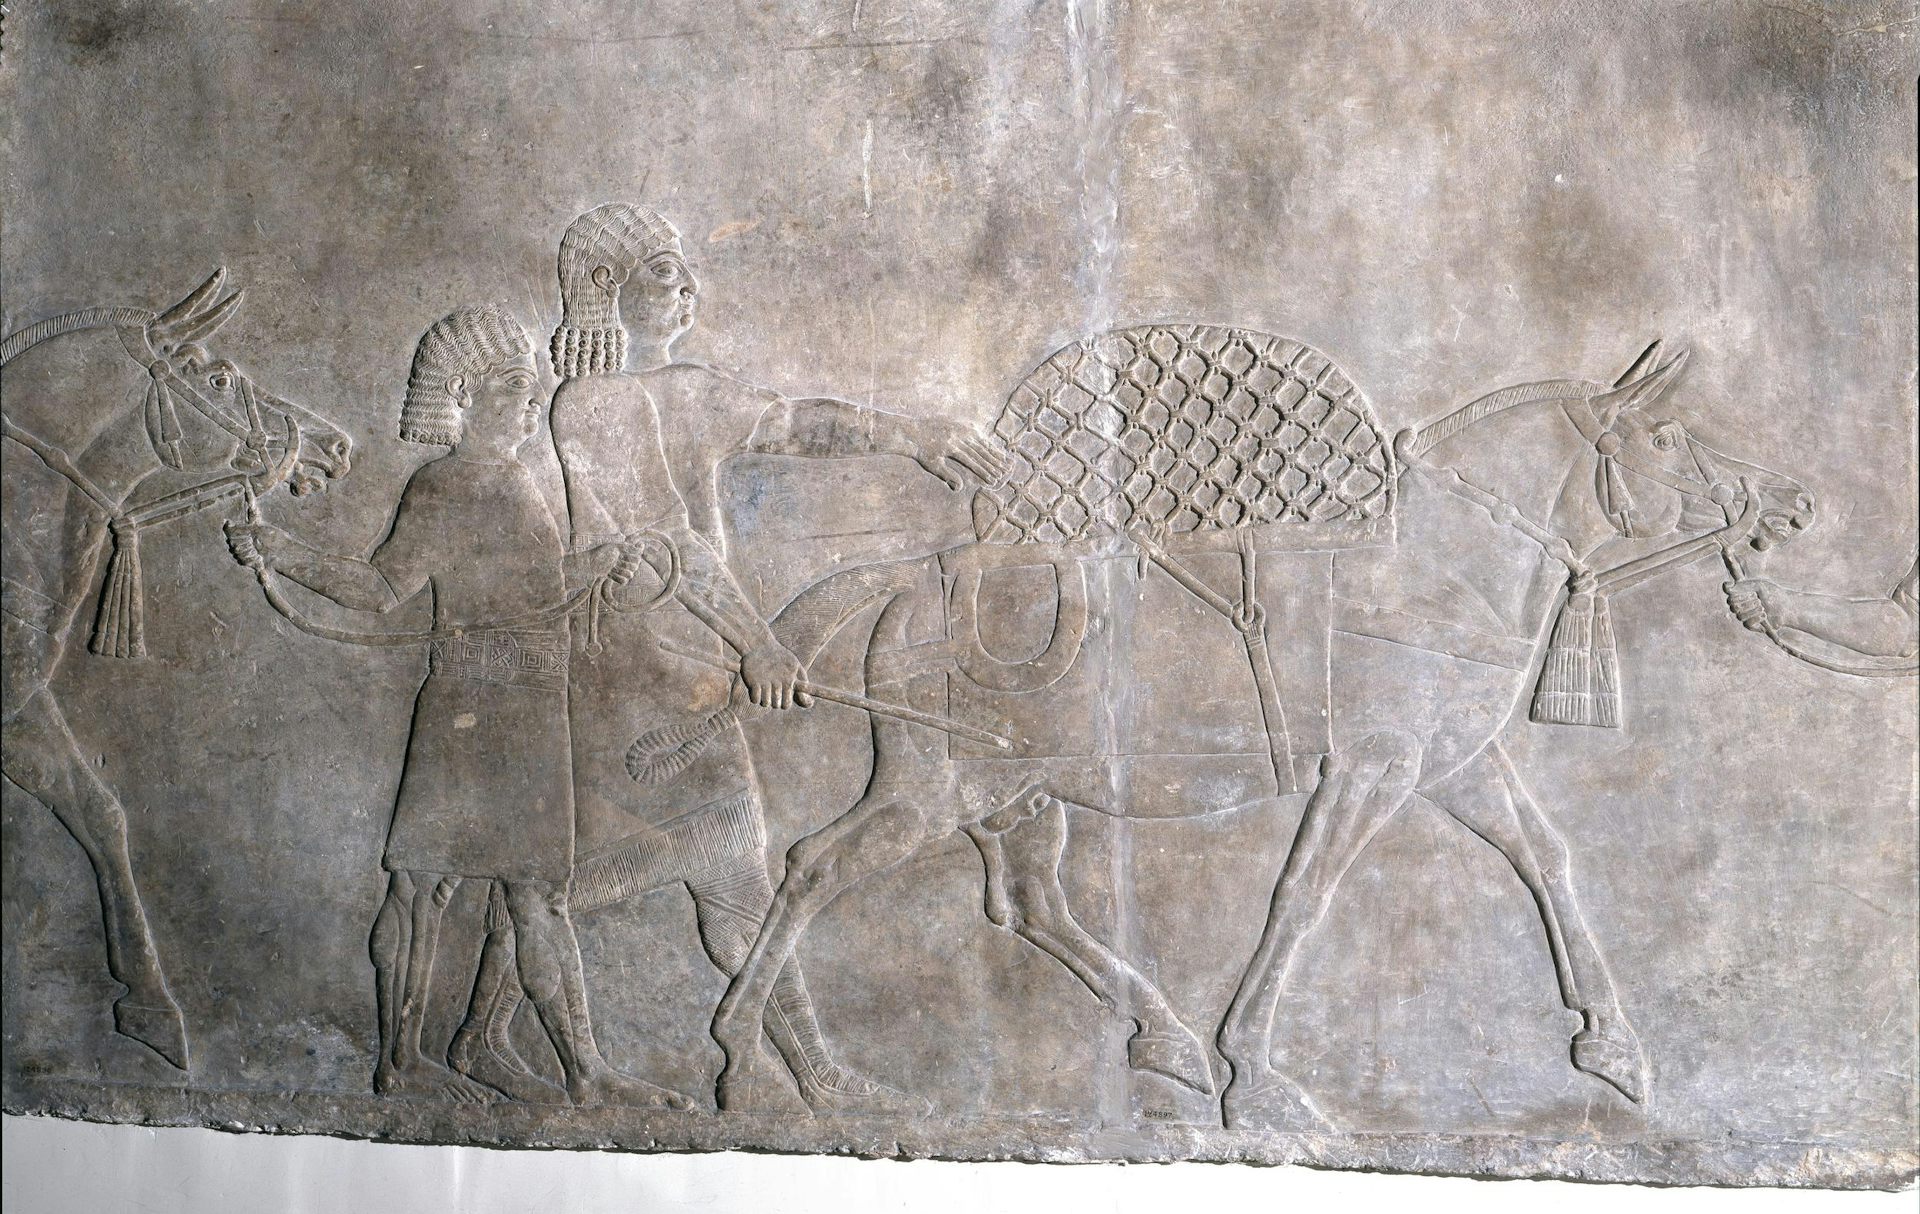 An ancient stone carving showing people with horses.